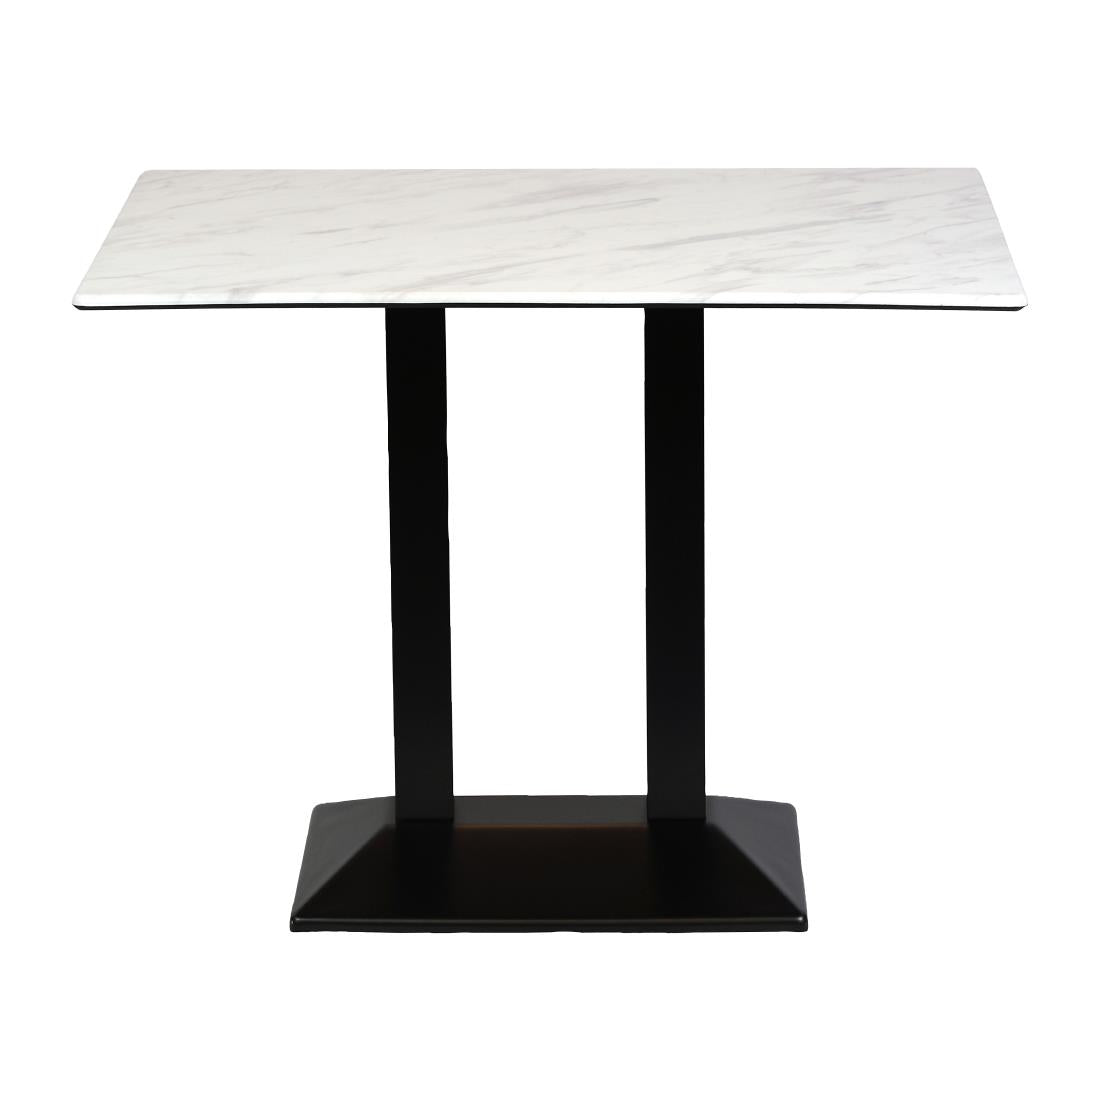 CZ838 Turin Metal Base Rectangular Poseur Table with Laminate Top Marble 1200x700mm JD Catering Equipment Solutions Ltd